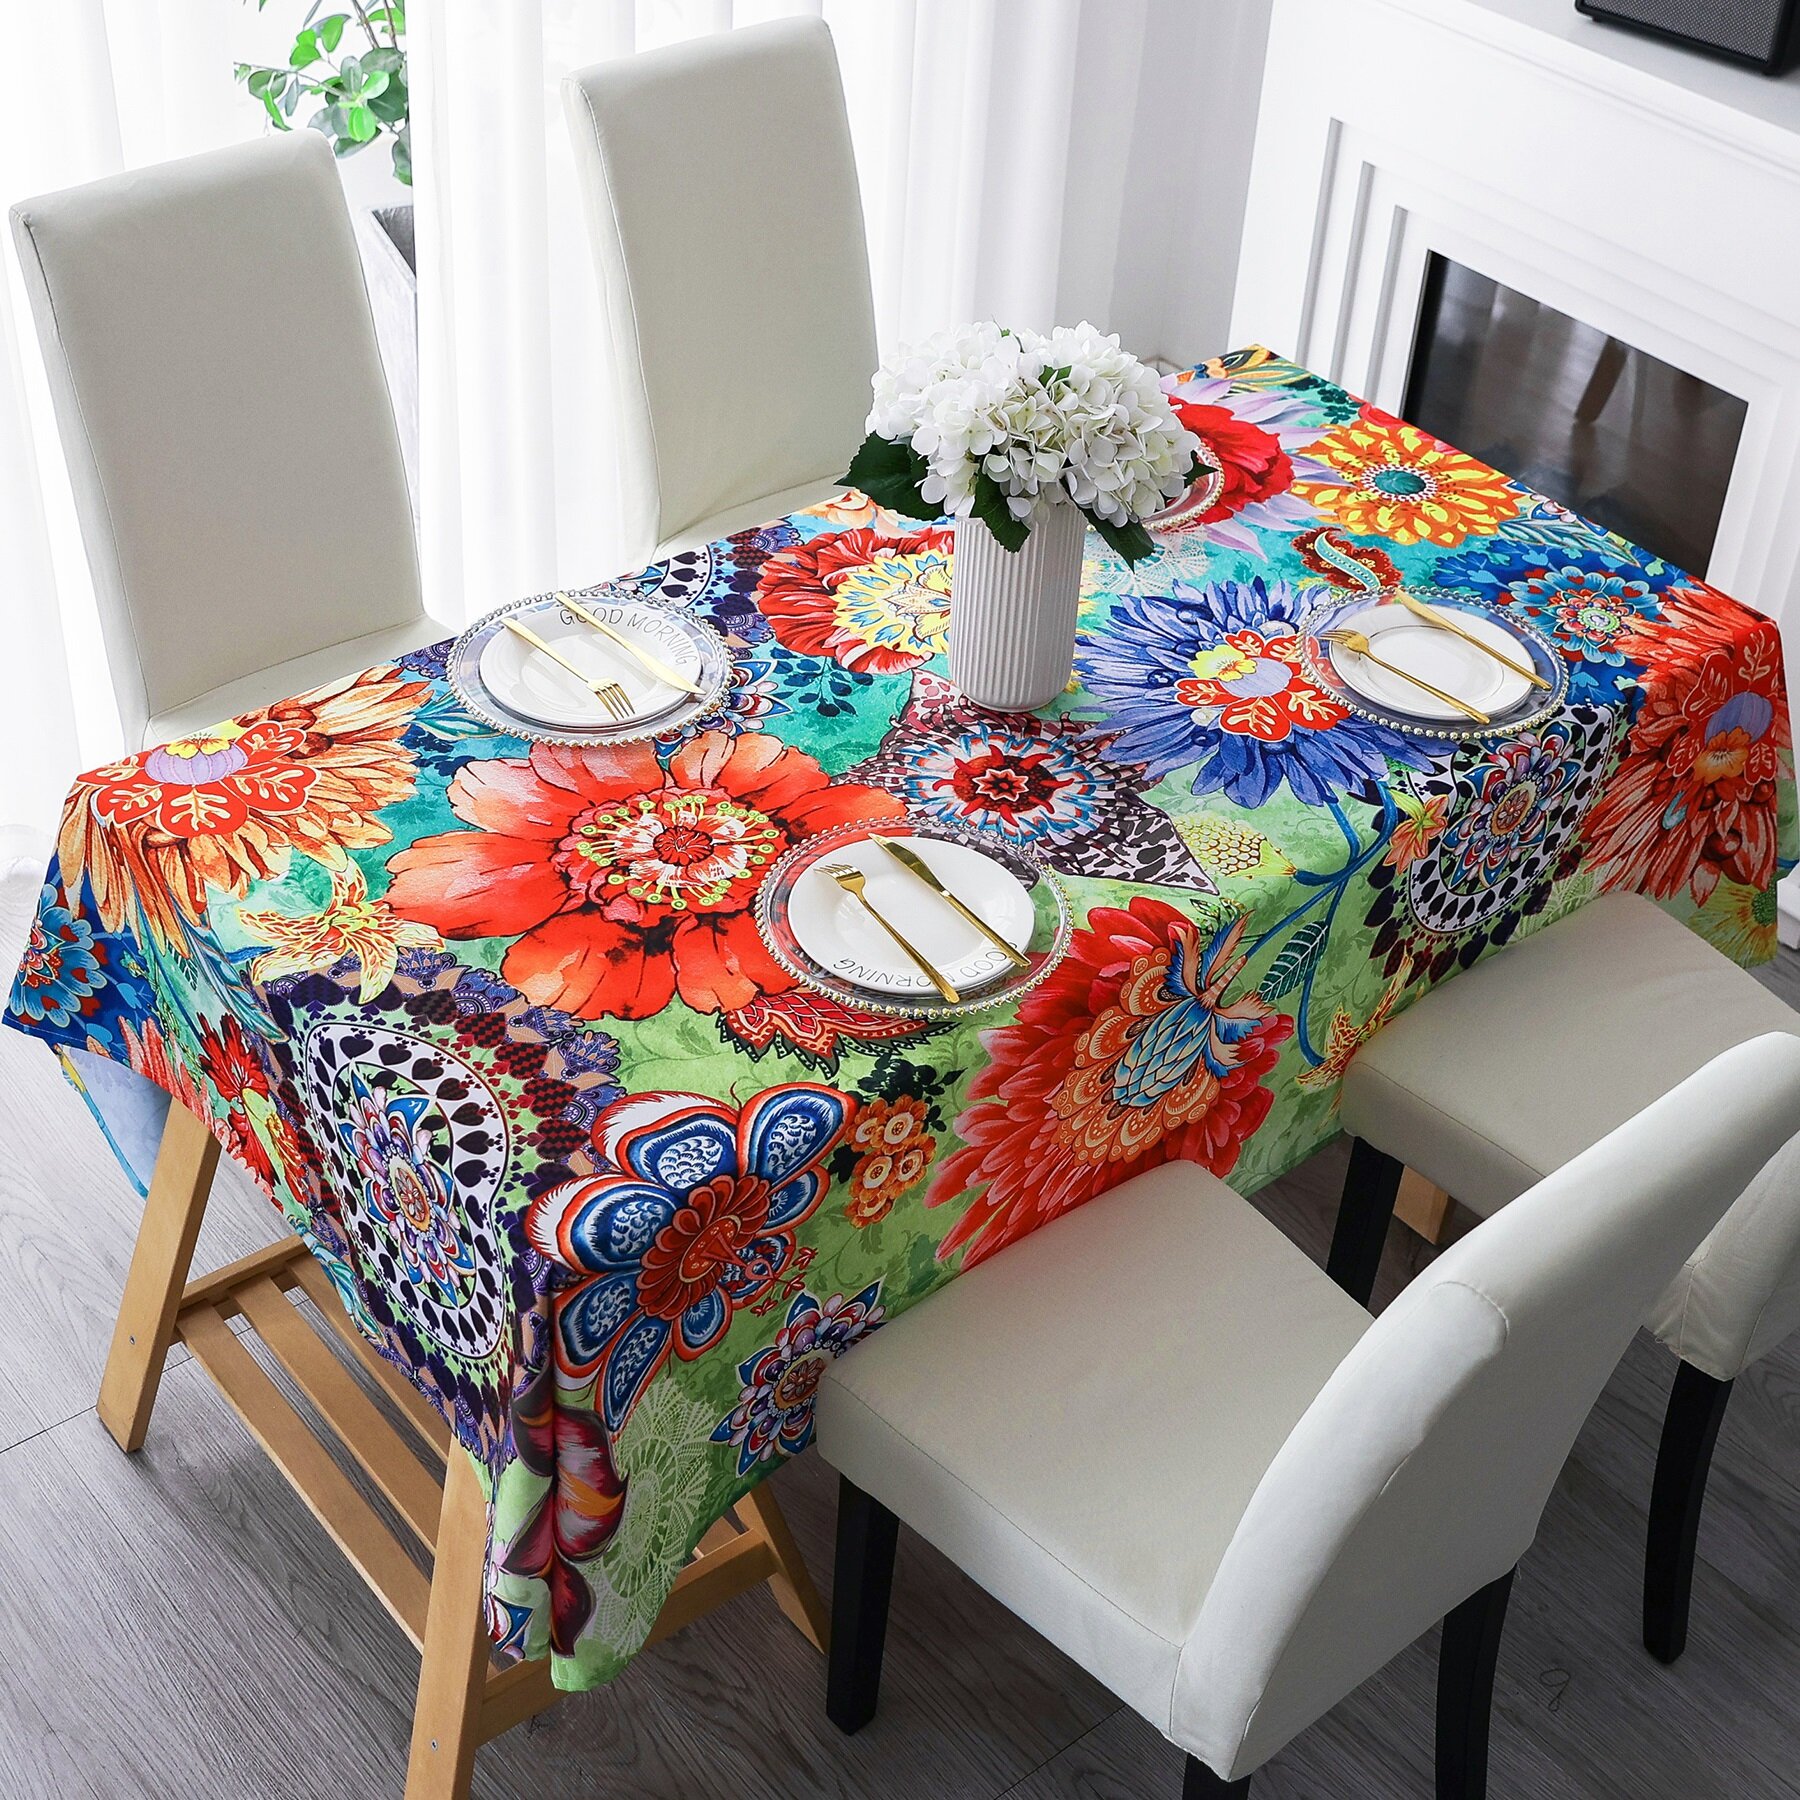 Waterproof Geometric Tablecloth Towel Rectangular Print Table Cloth Cover Dining 